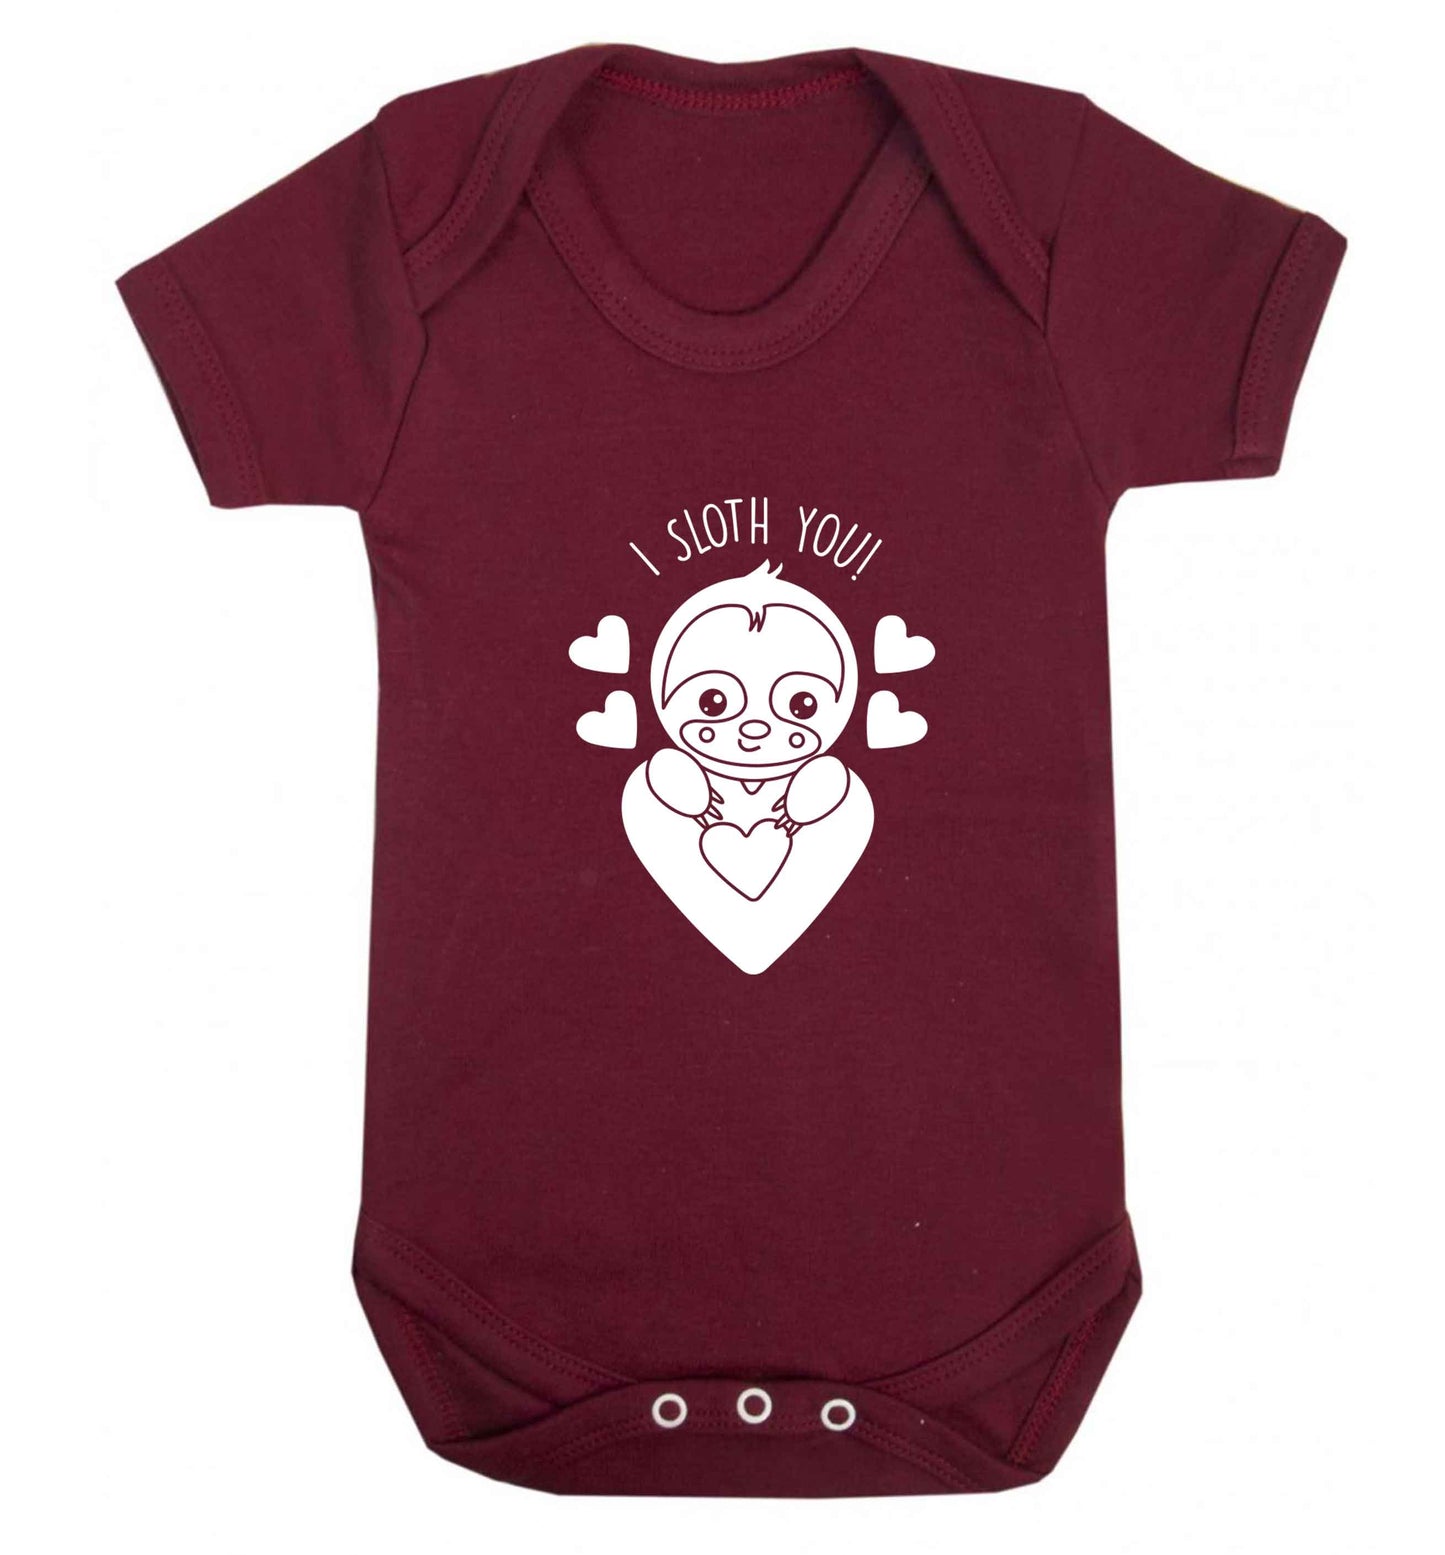 I sloth you baby vest maroon 18-24 months